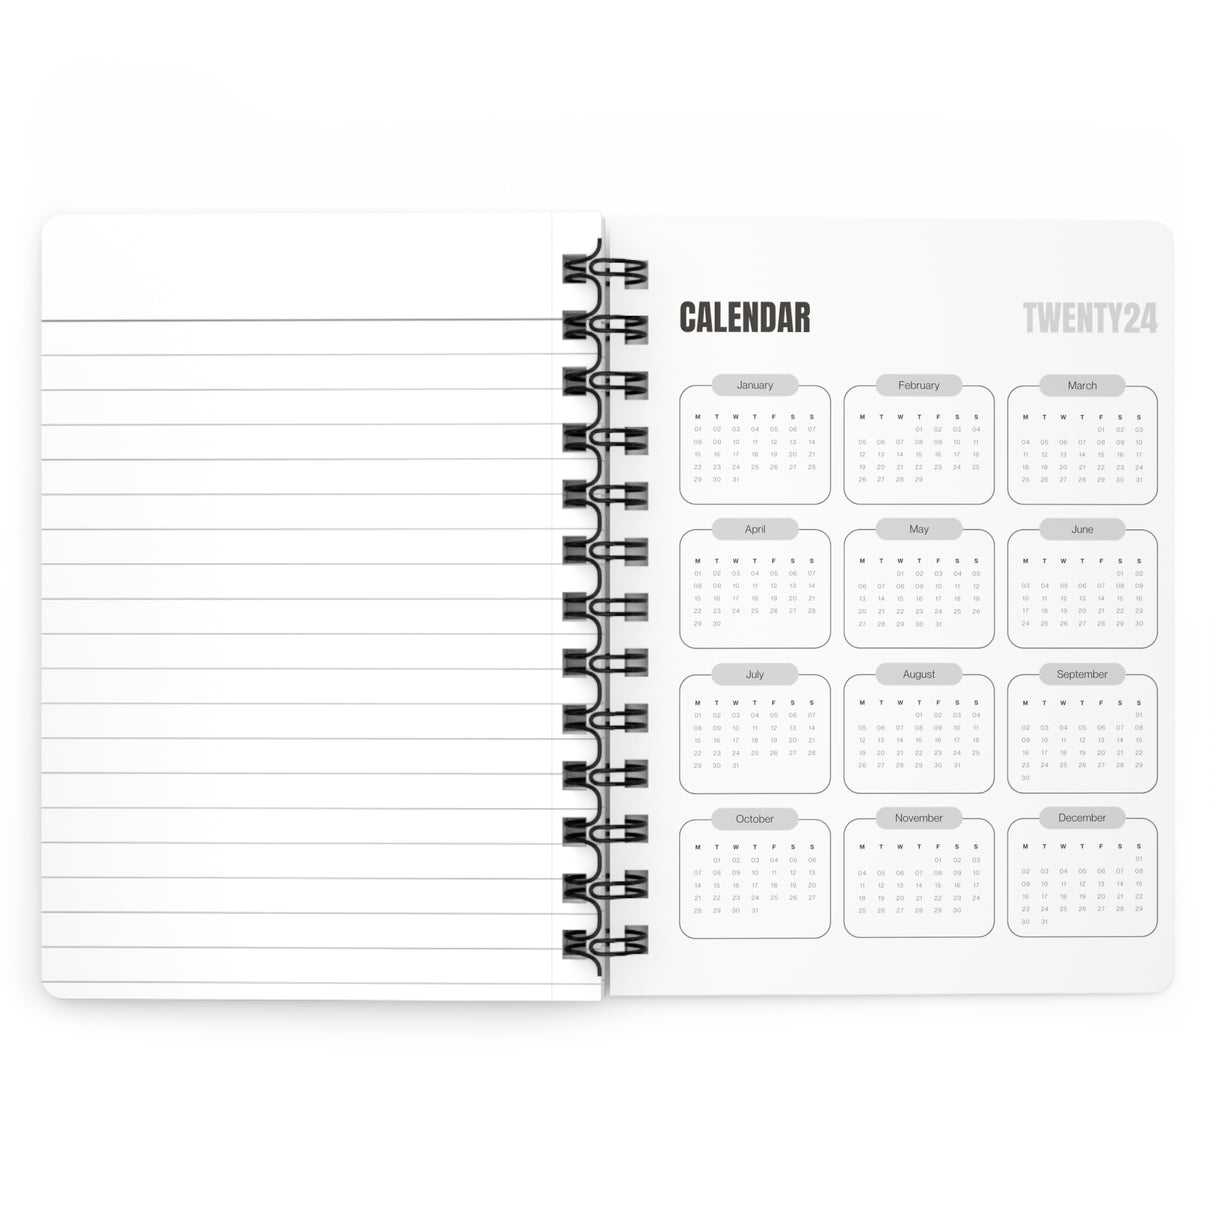 Summitting Spiral Bound Notebooks and Journals with 2023-2024 Year-at-a-Glance Calendar